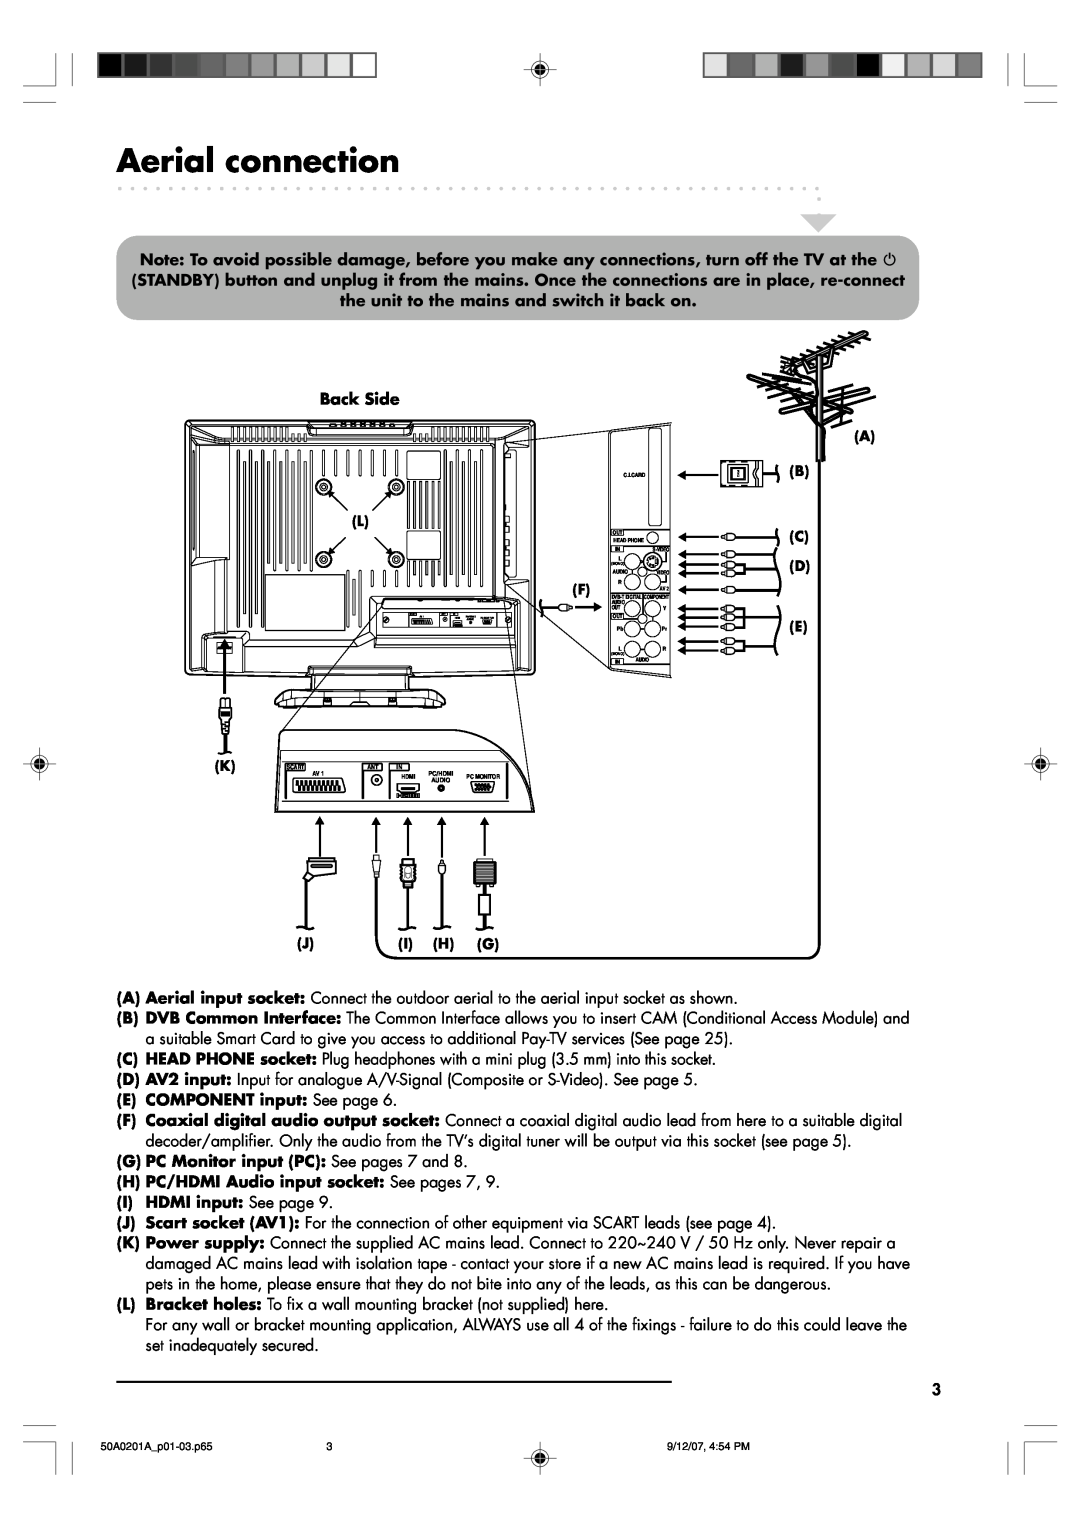 Sansui TV19PL120DVD Aerial connection, Back Side, E COMPONENT input See page, G PC Monitor input PC See pages 7 and 